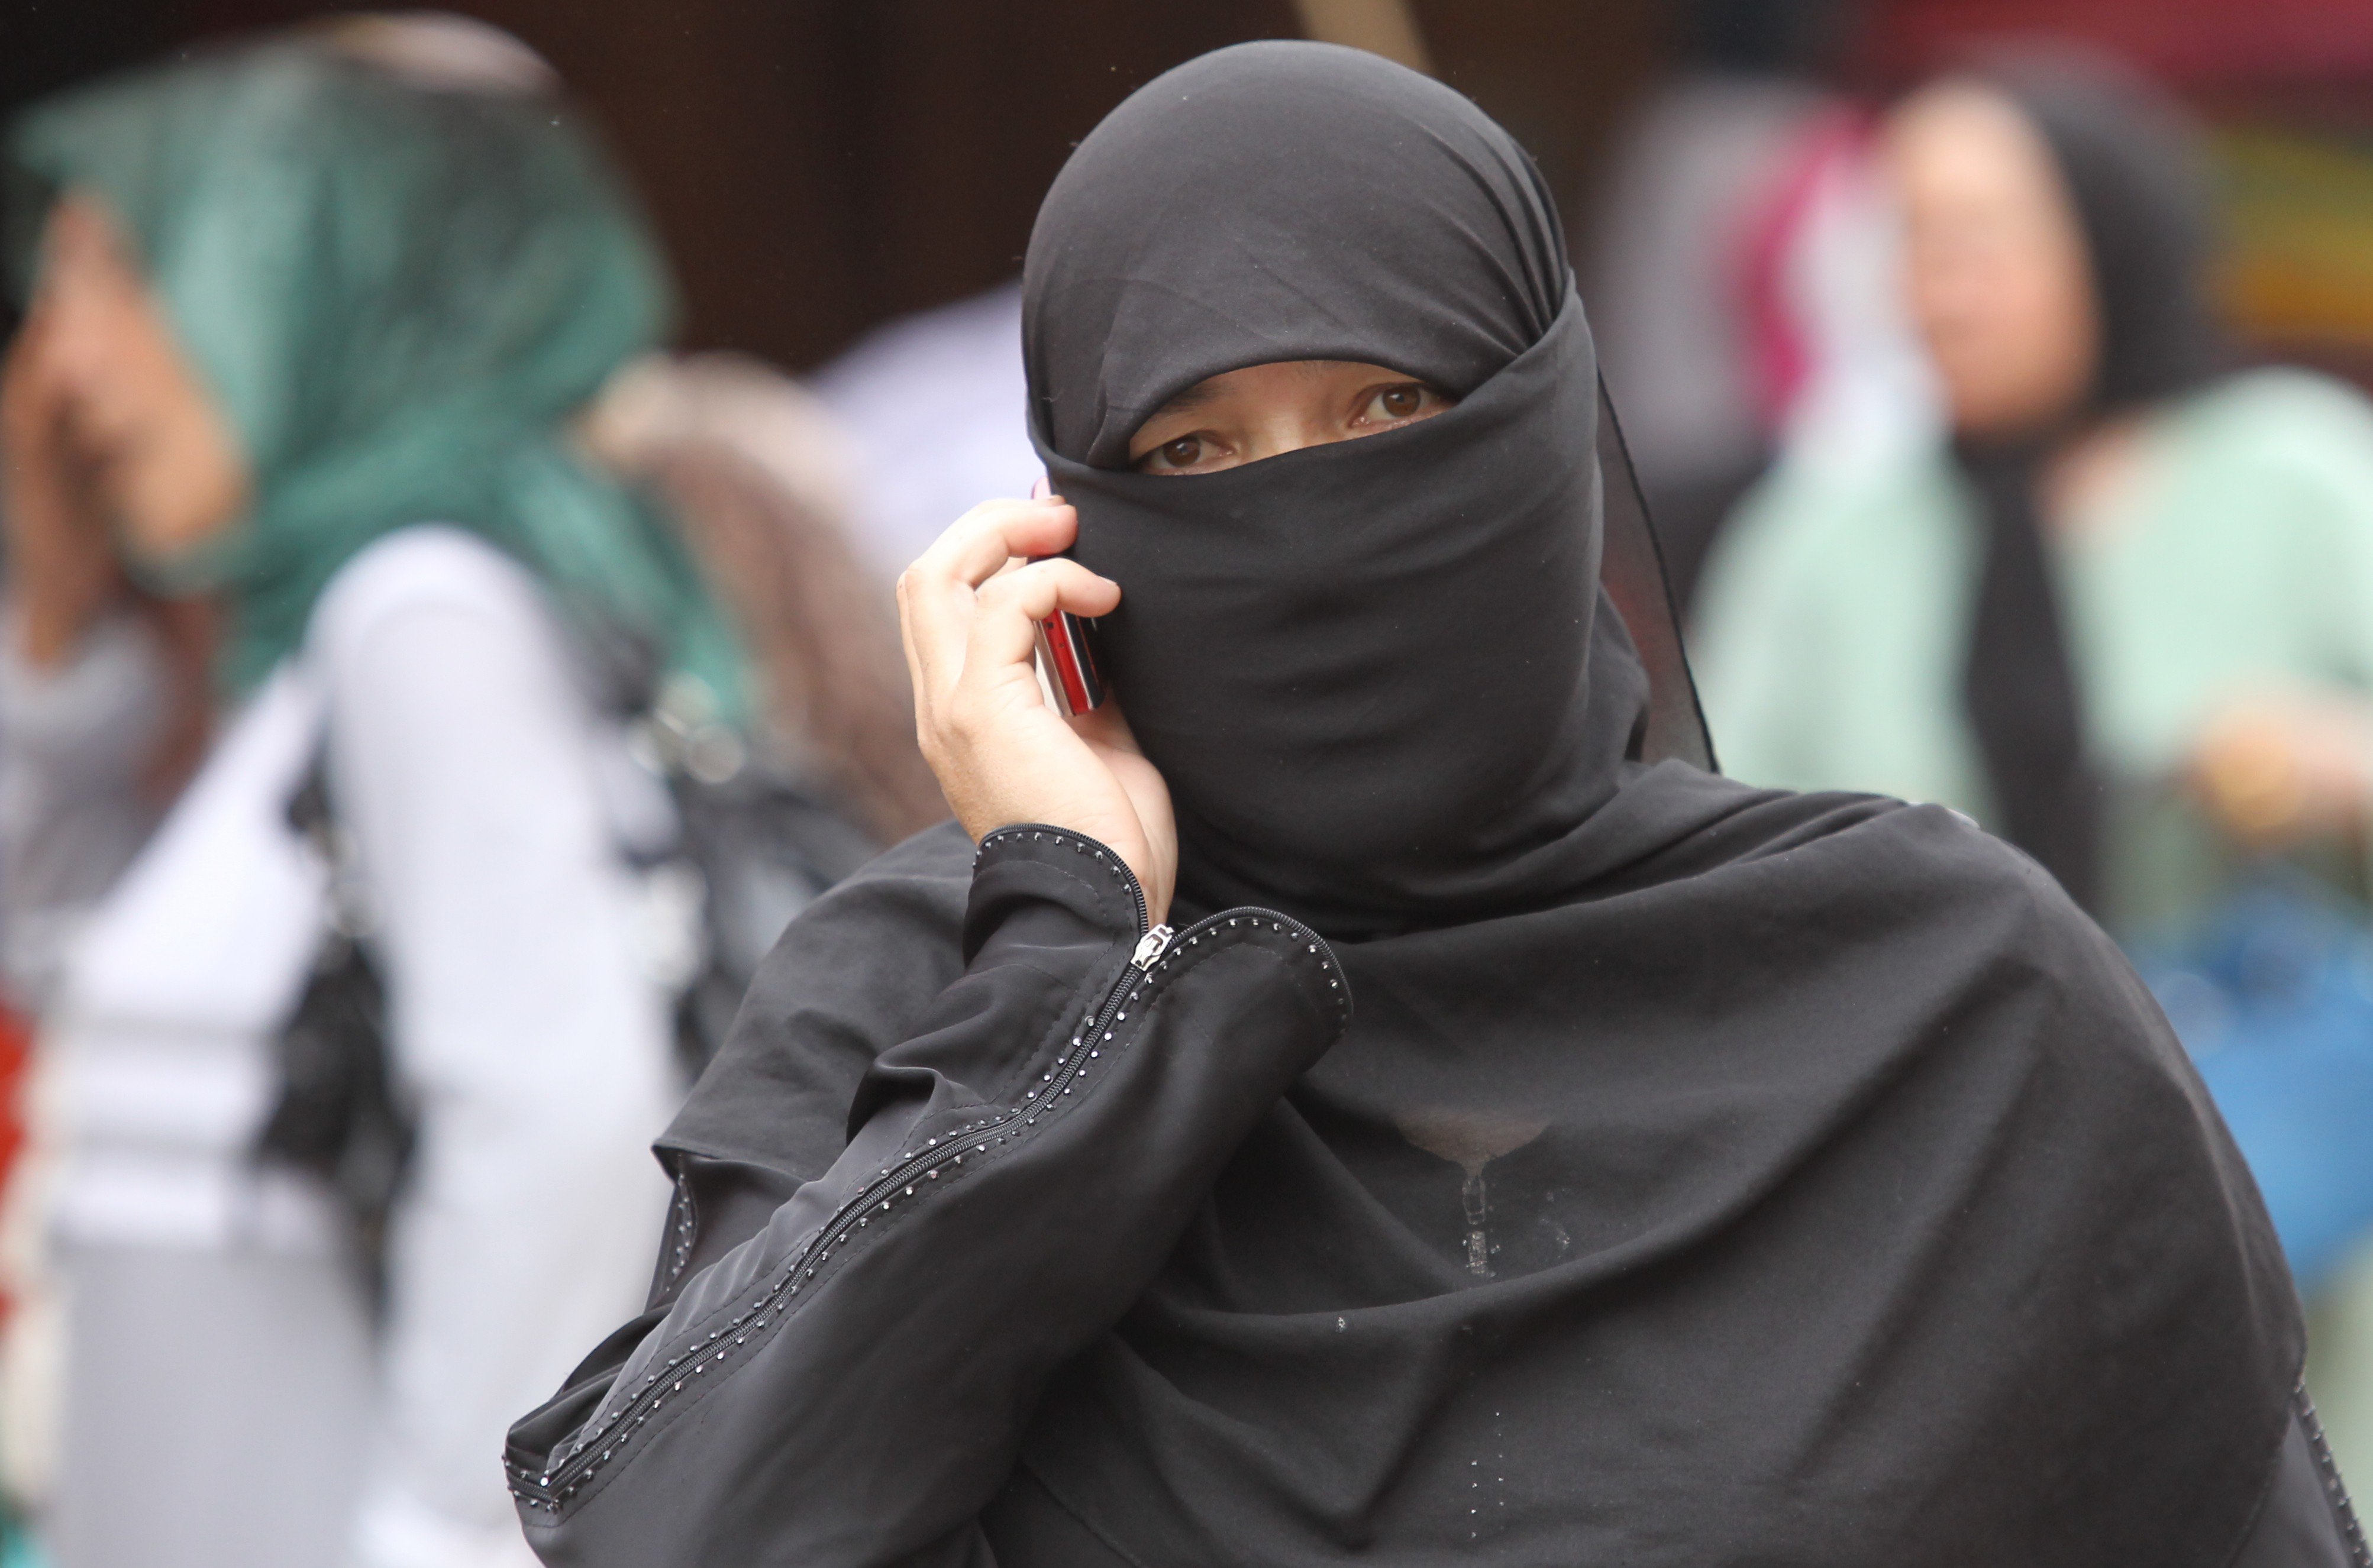 Wearing a full-face veil in a country where most Muslim women choose either a hijab or no headscarf at all is as much a cultural as a religious choice, and one being promoted and defended by groups such as the Niqab Squad